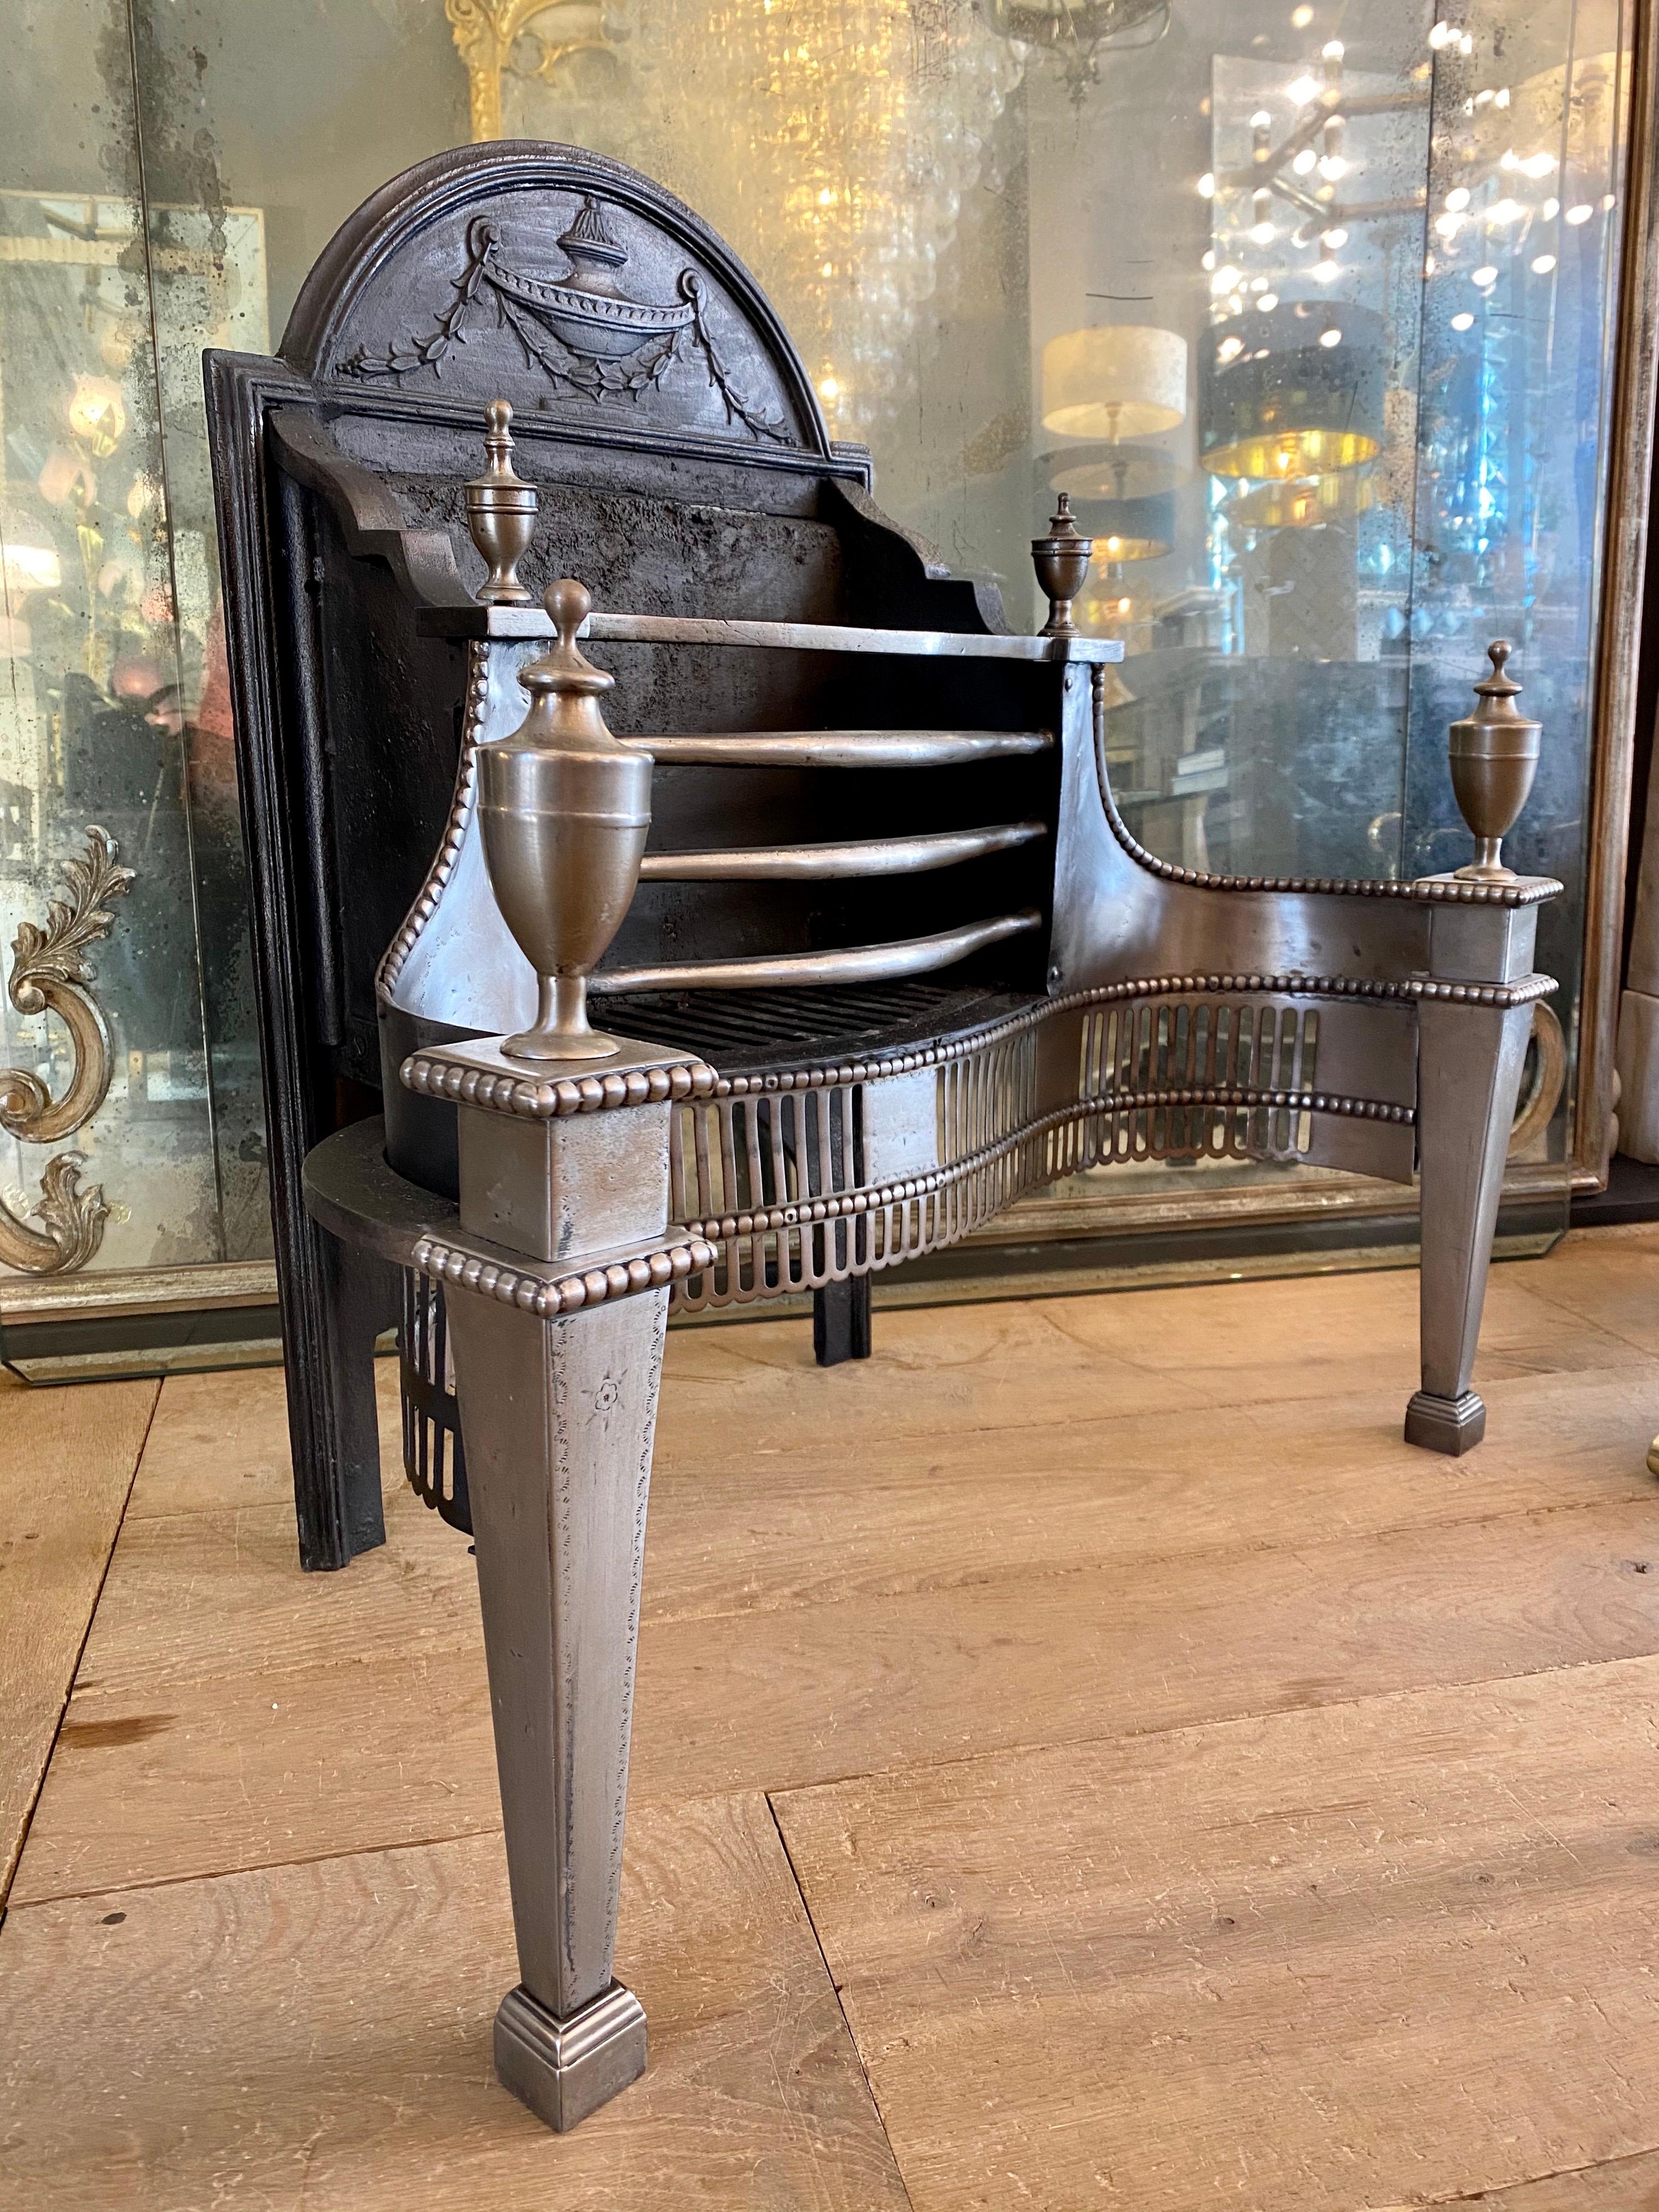 19th Century Antique Polished Steel Fire Grate by Thomas Elsley London For Sale